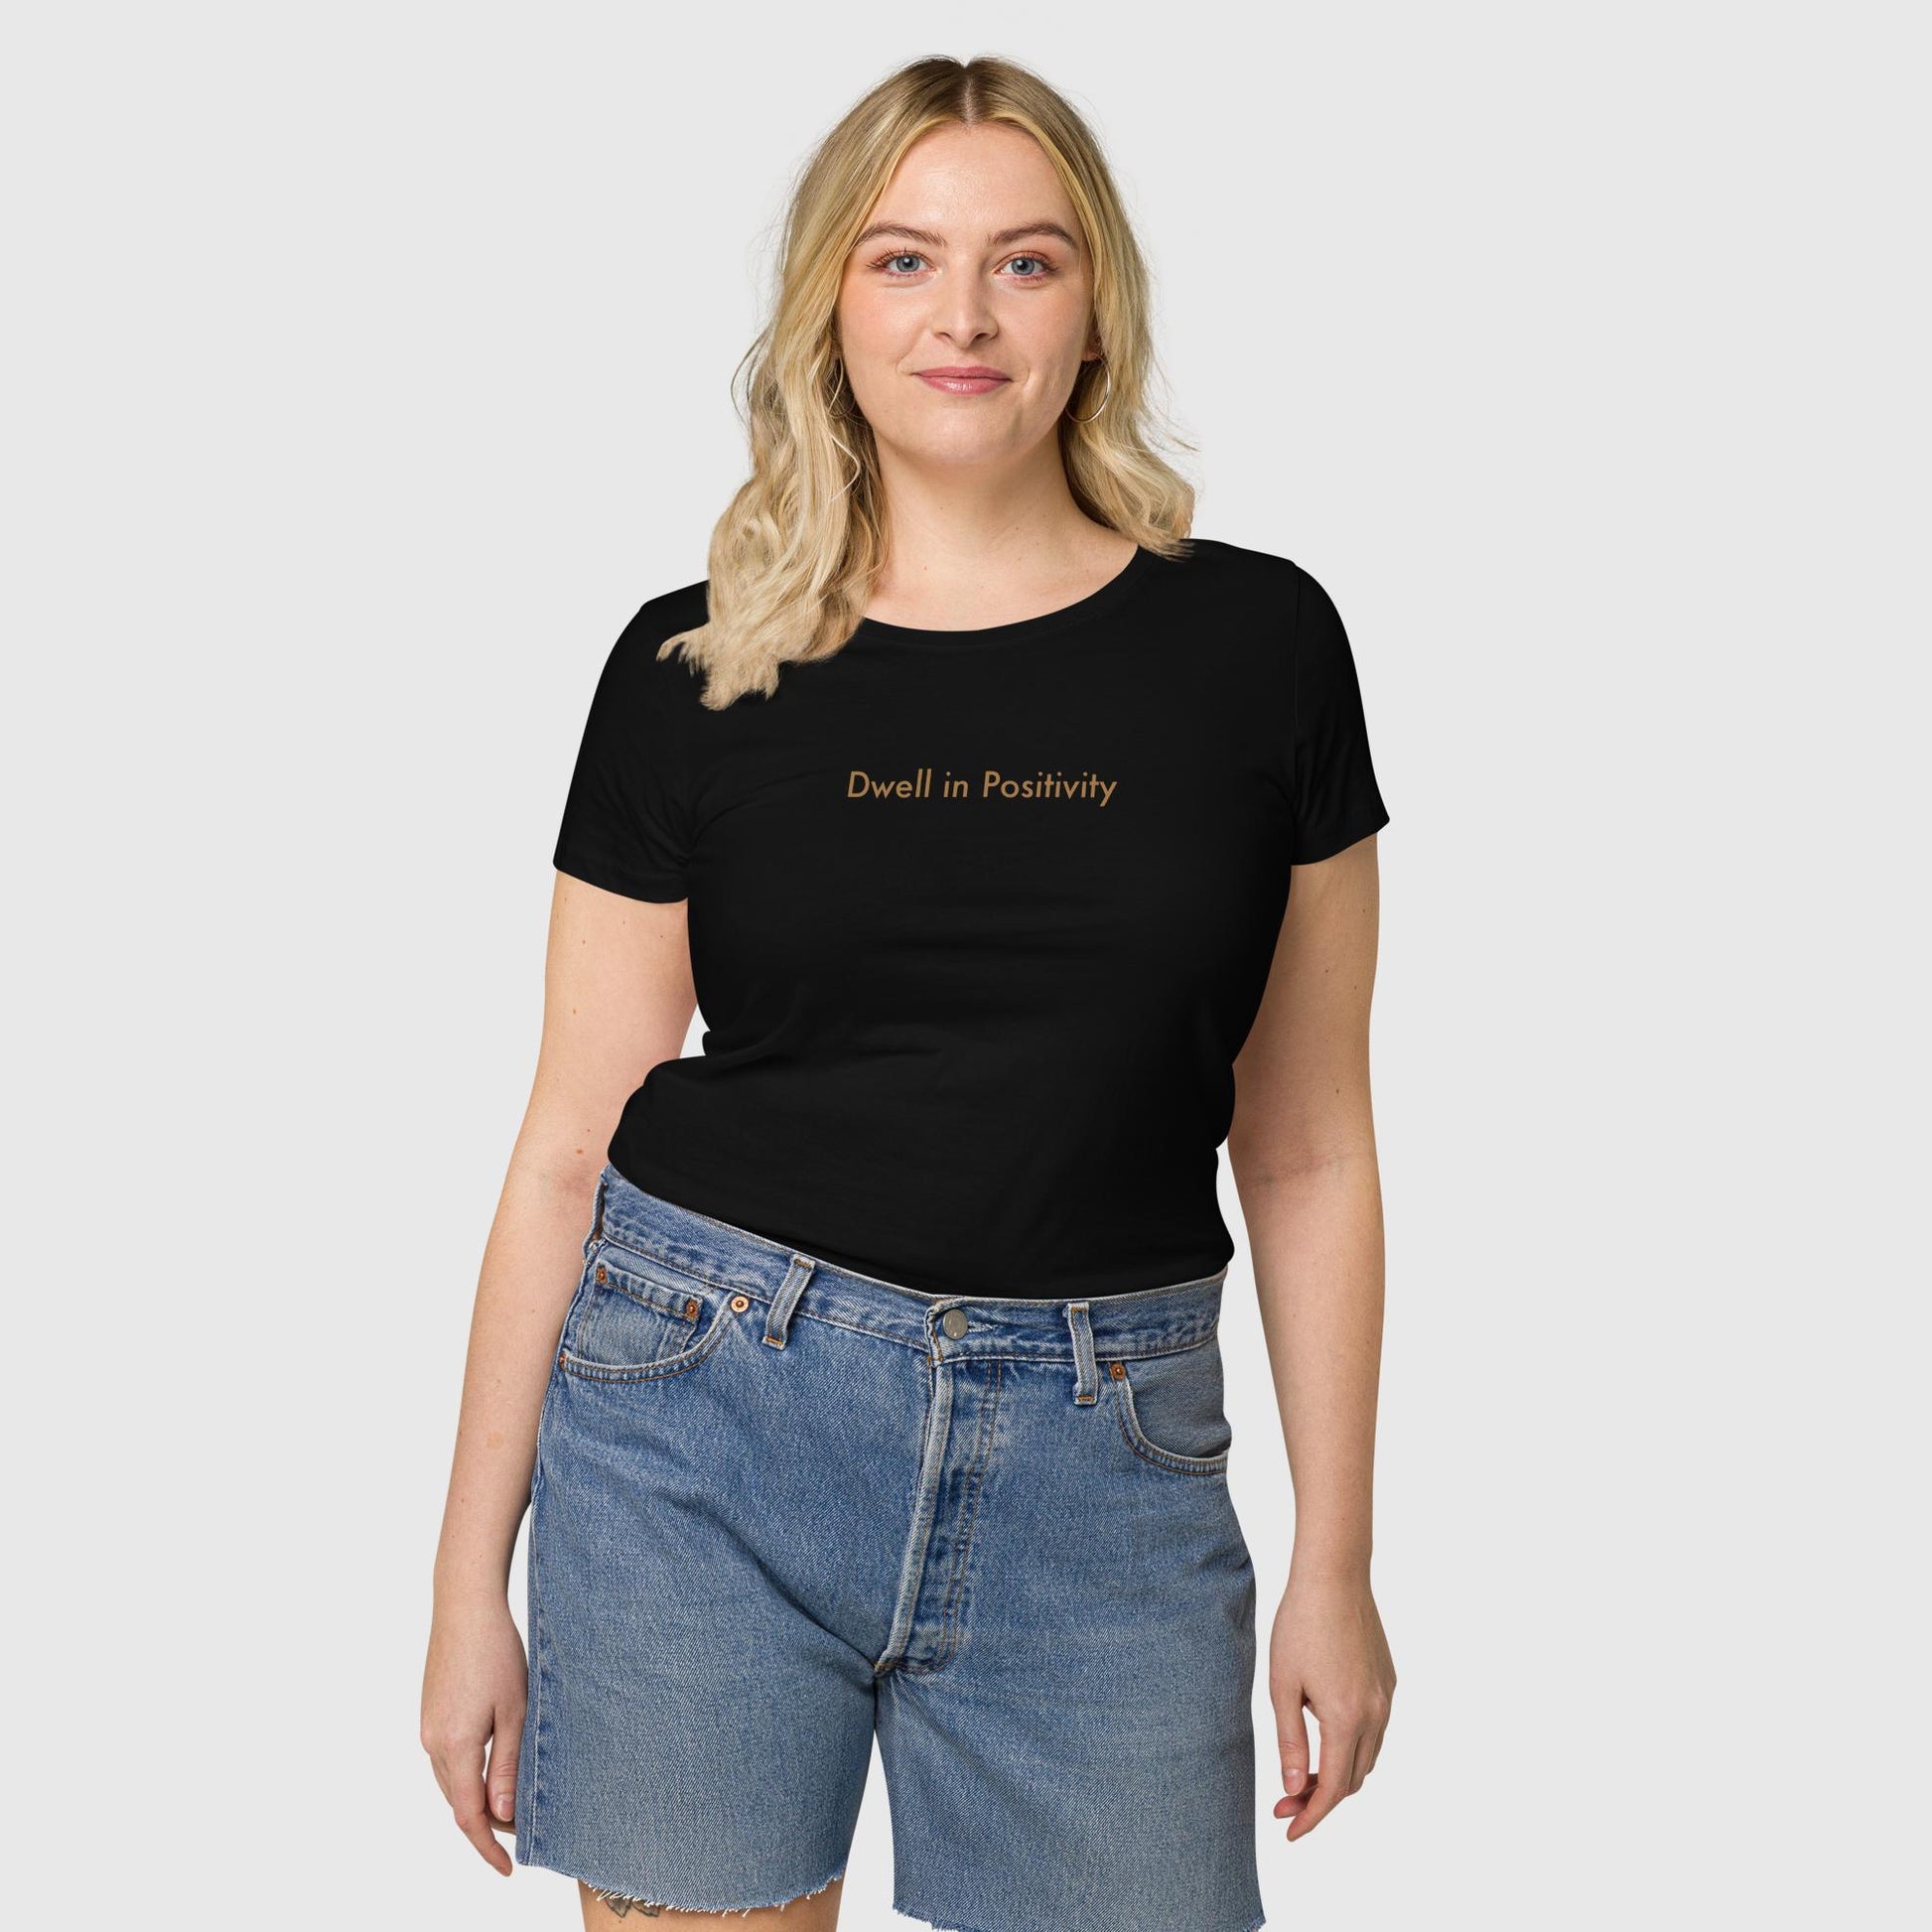 Women's black organic cotton t-shirt that features Emily Dickinson's quote, "I dwell in positivity."